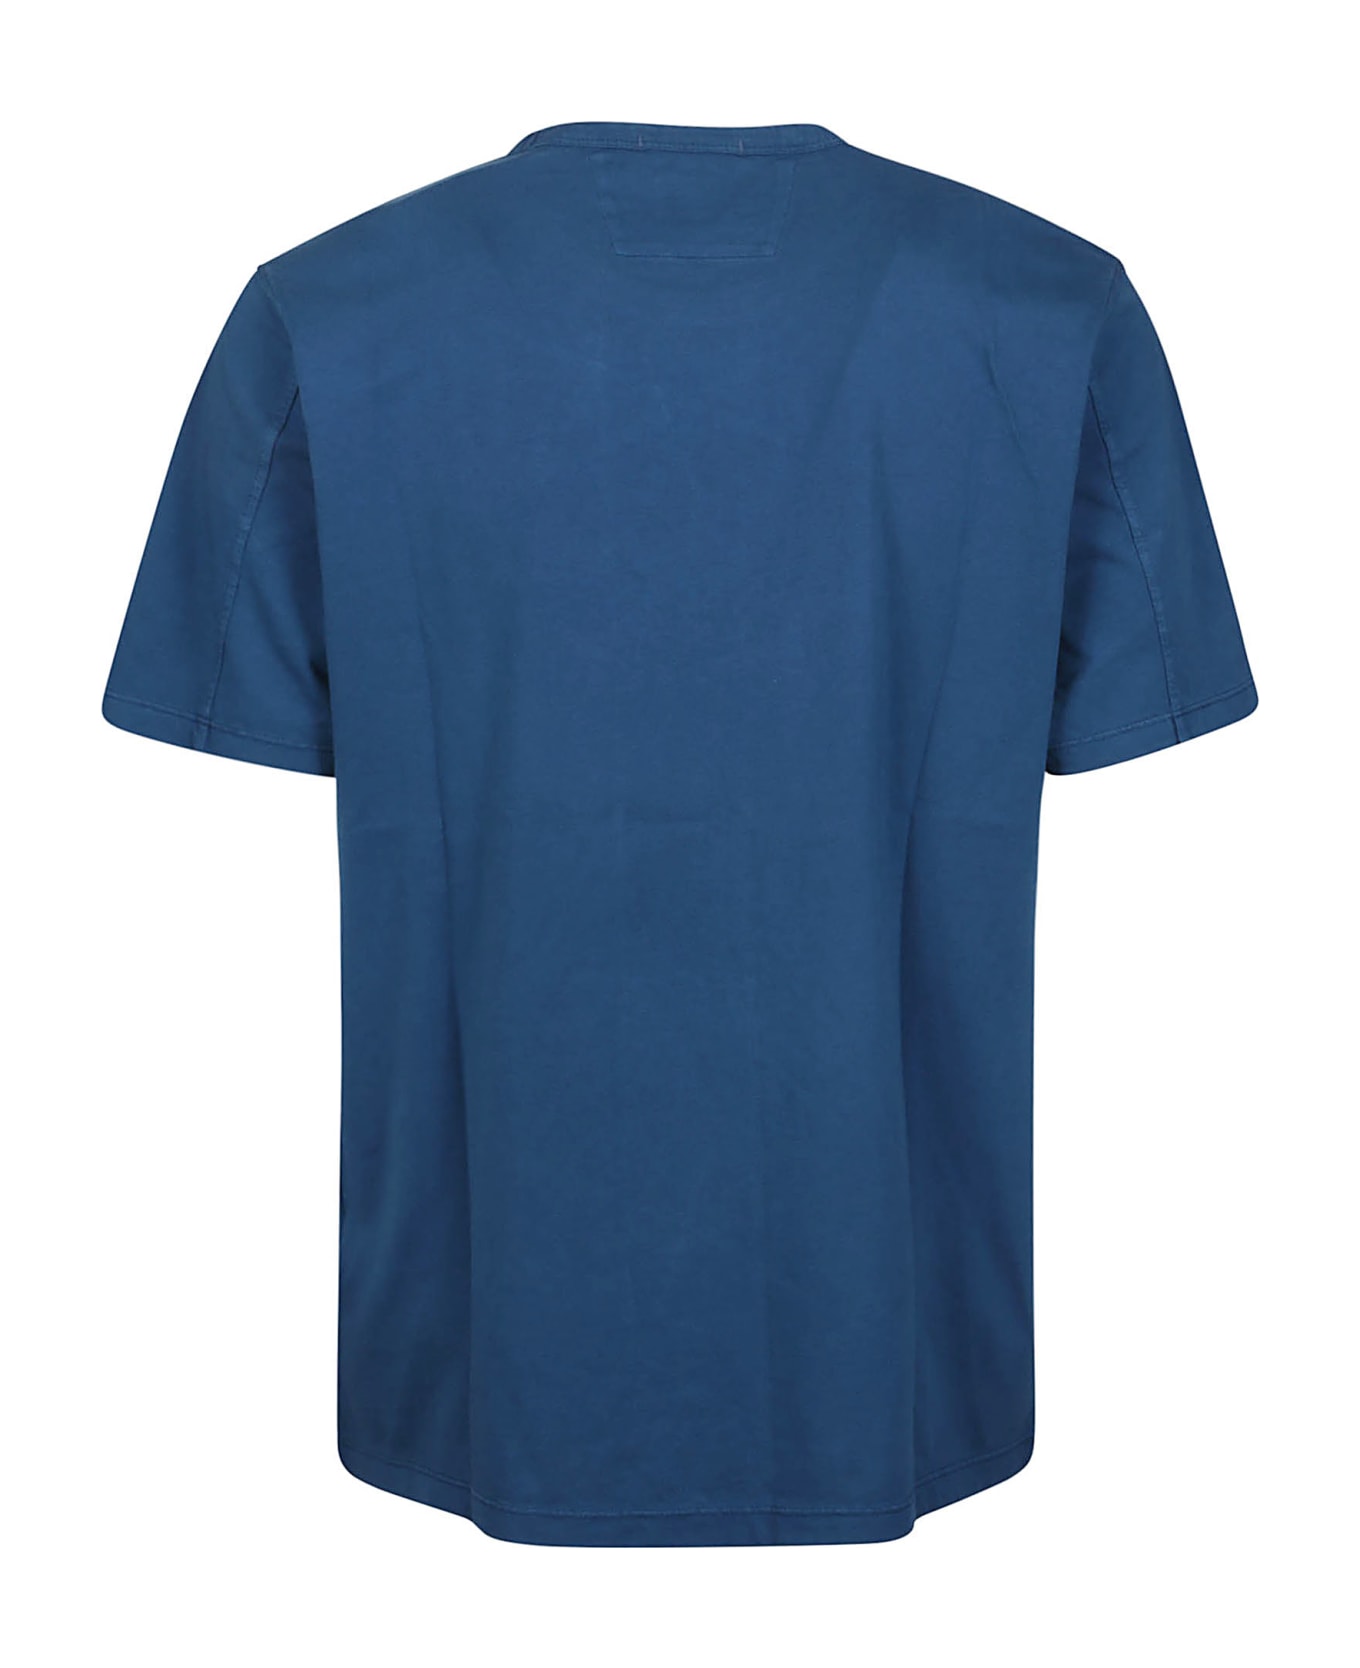 C.P. Company 24/1 Jersey Resist Dyed Logo T-shirt - Ink Blue